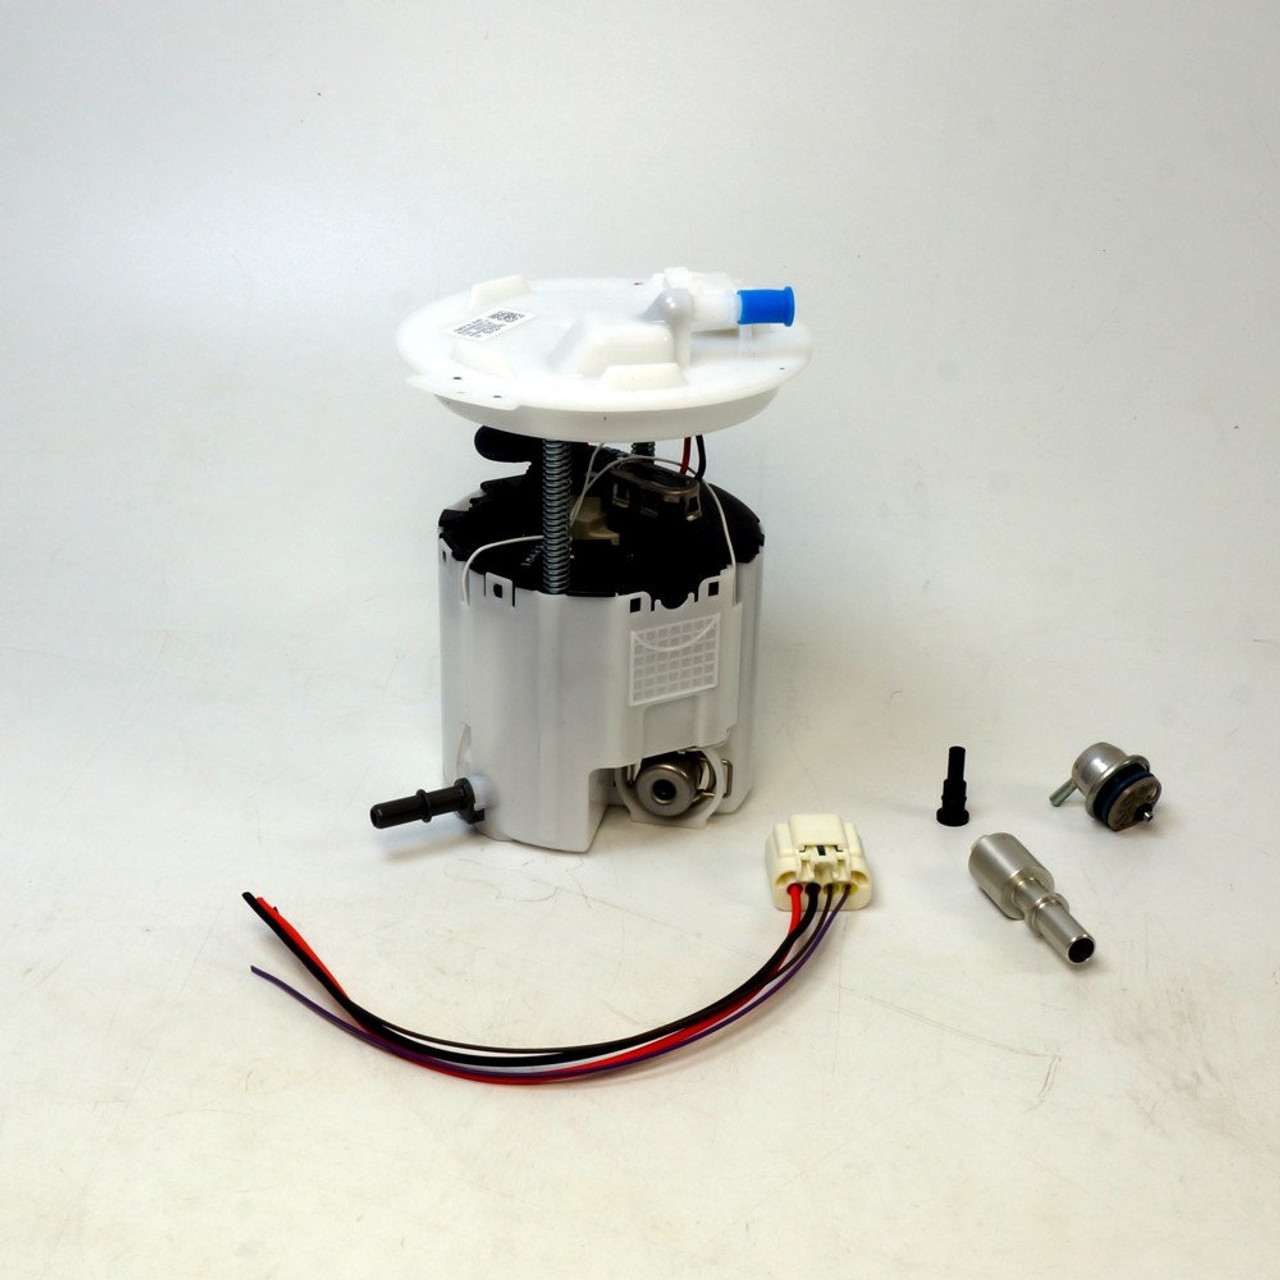 GM ZL1 Fuel Pump Upgrade|  Incl Retro Fitting Kit (2006 - 2009 Vehicles)